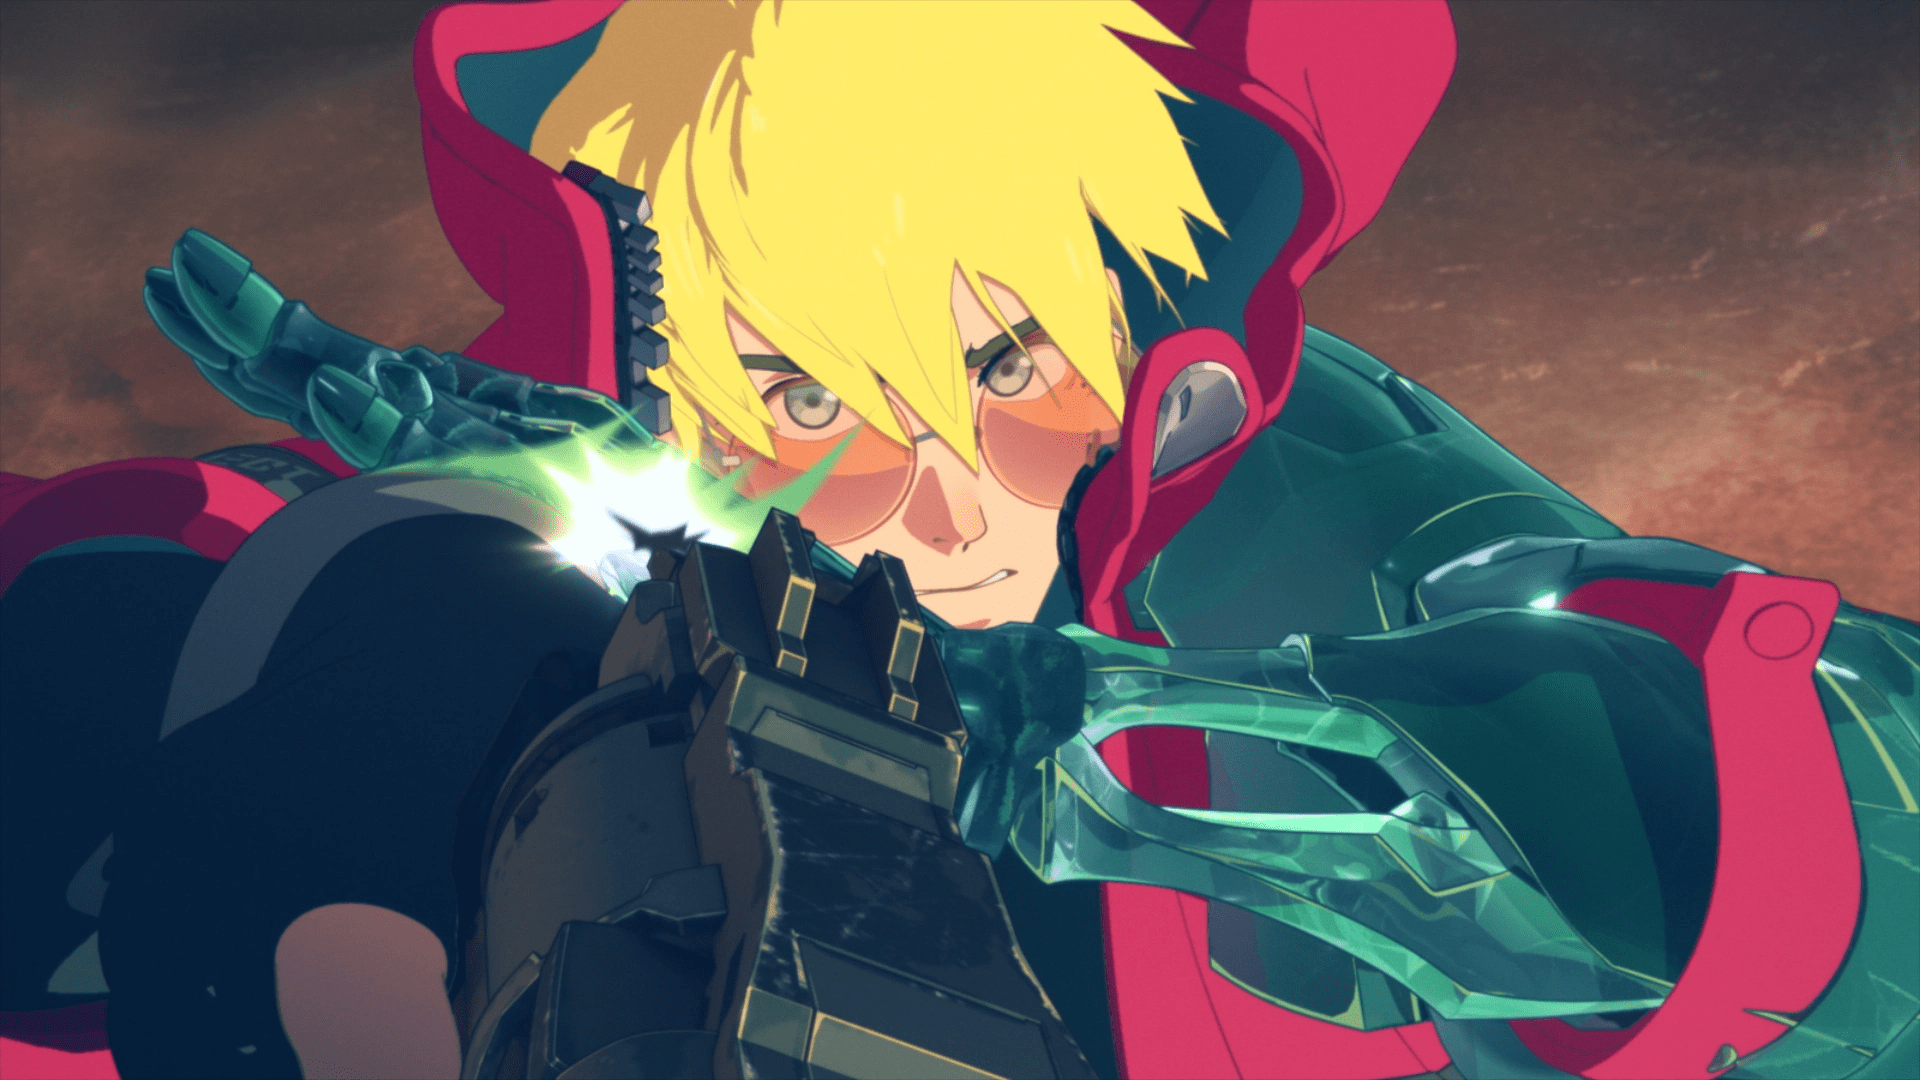 In a Trigun mood again? Here are some more action-packed space Westerns!